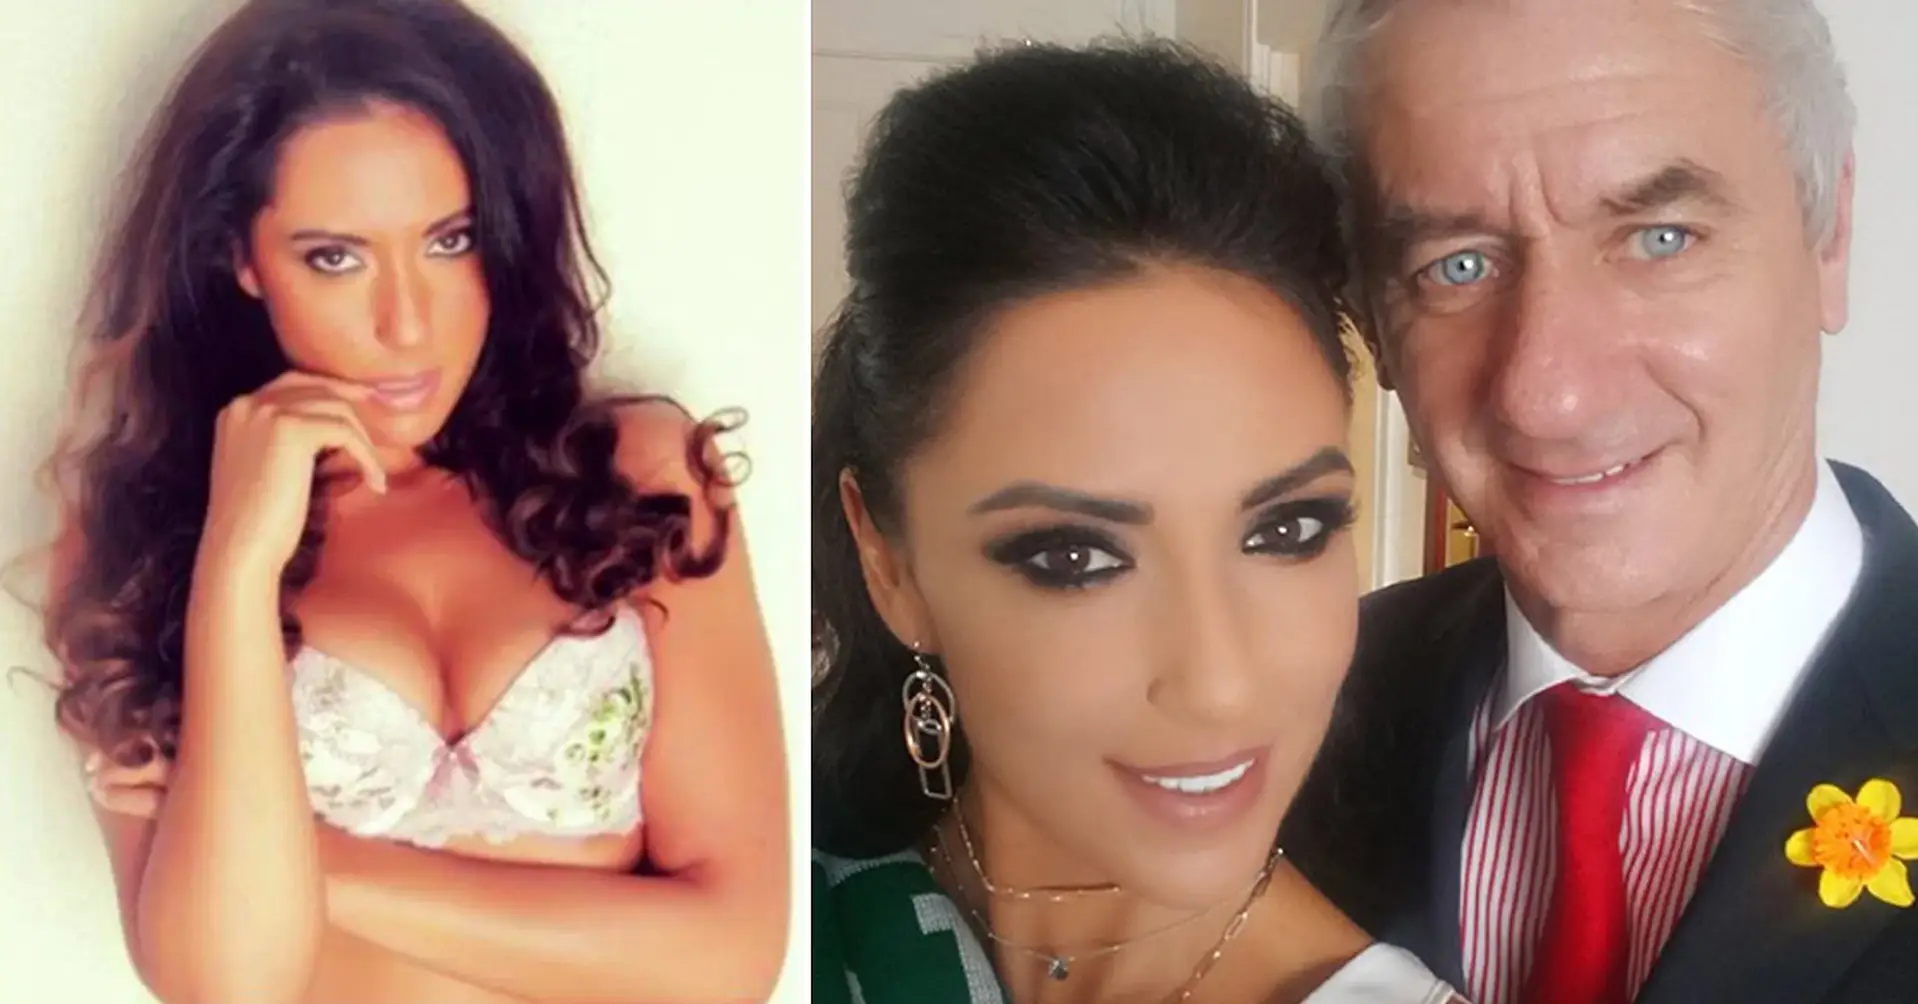 Biggest age gap in football? Liverpool legend's wife looks outrageously stunning